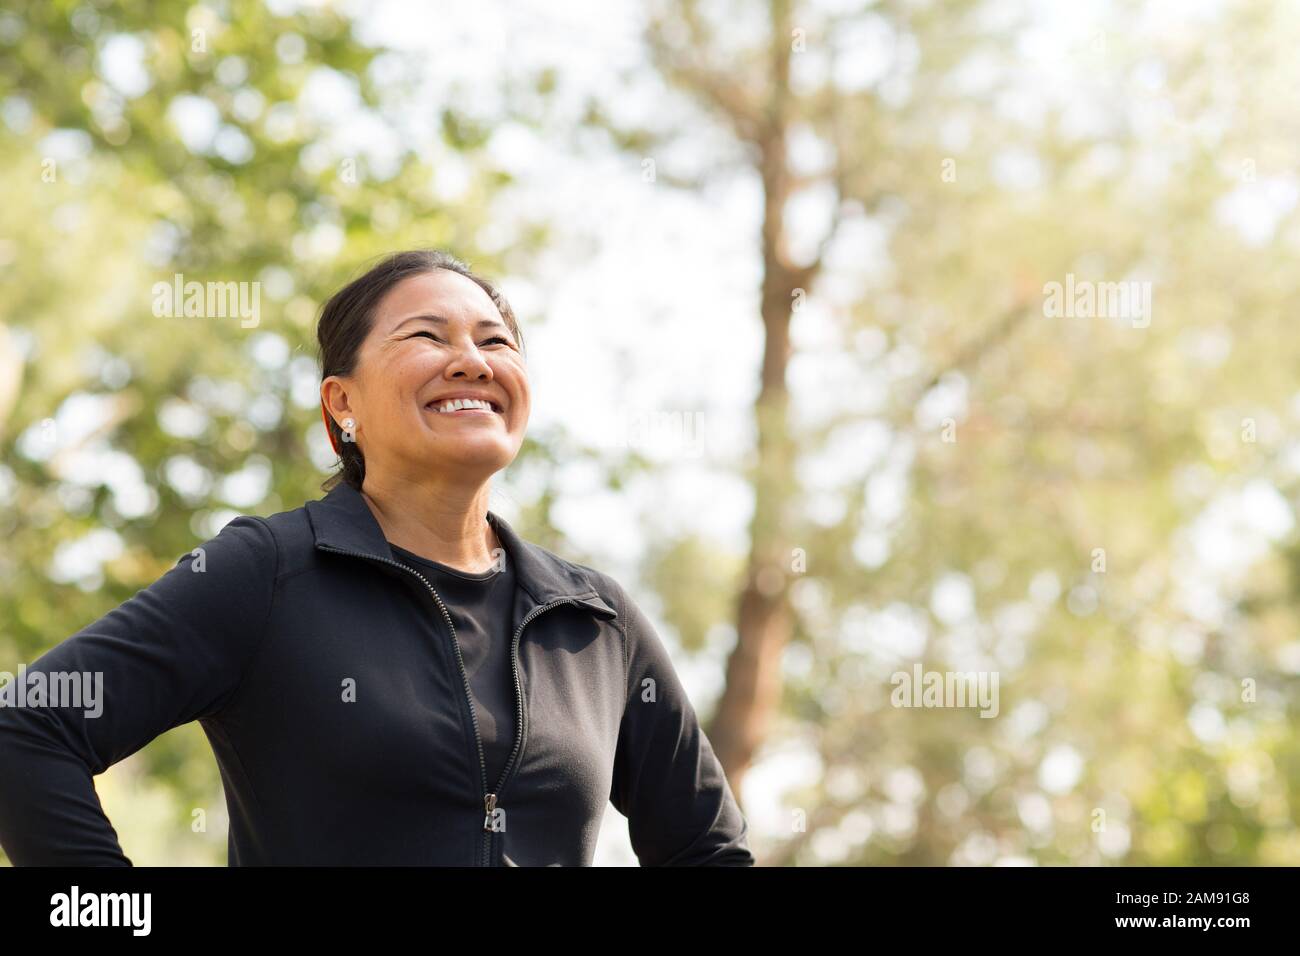 Portrait of a fit Asian woman exercising. Stock Photo